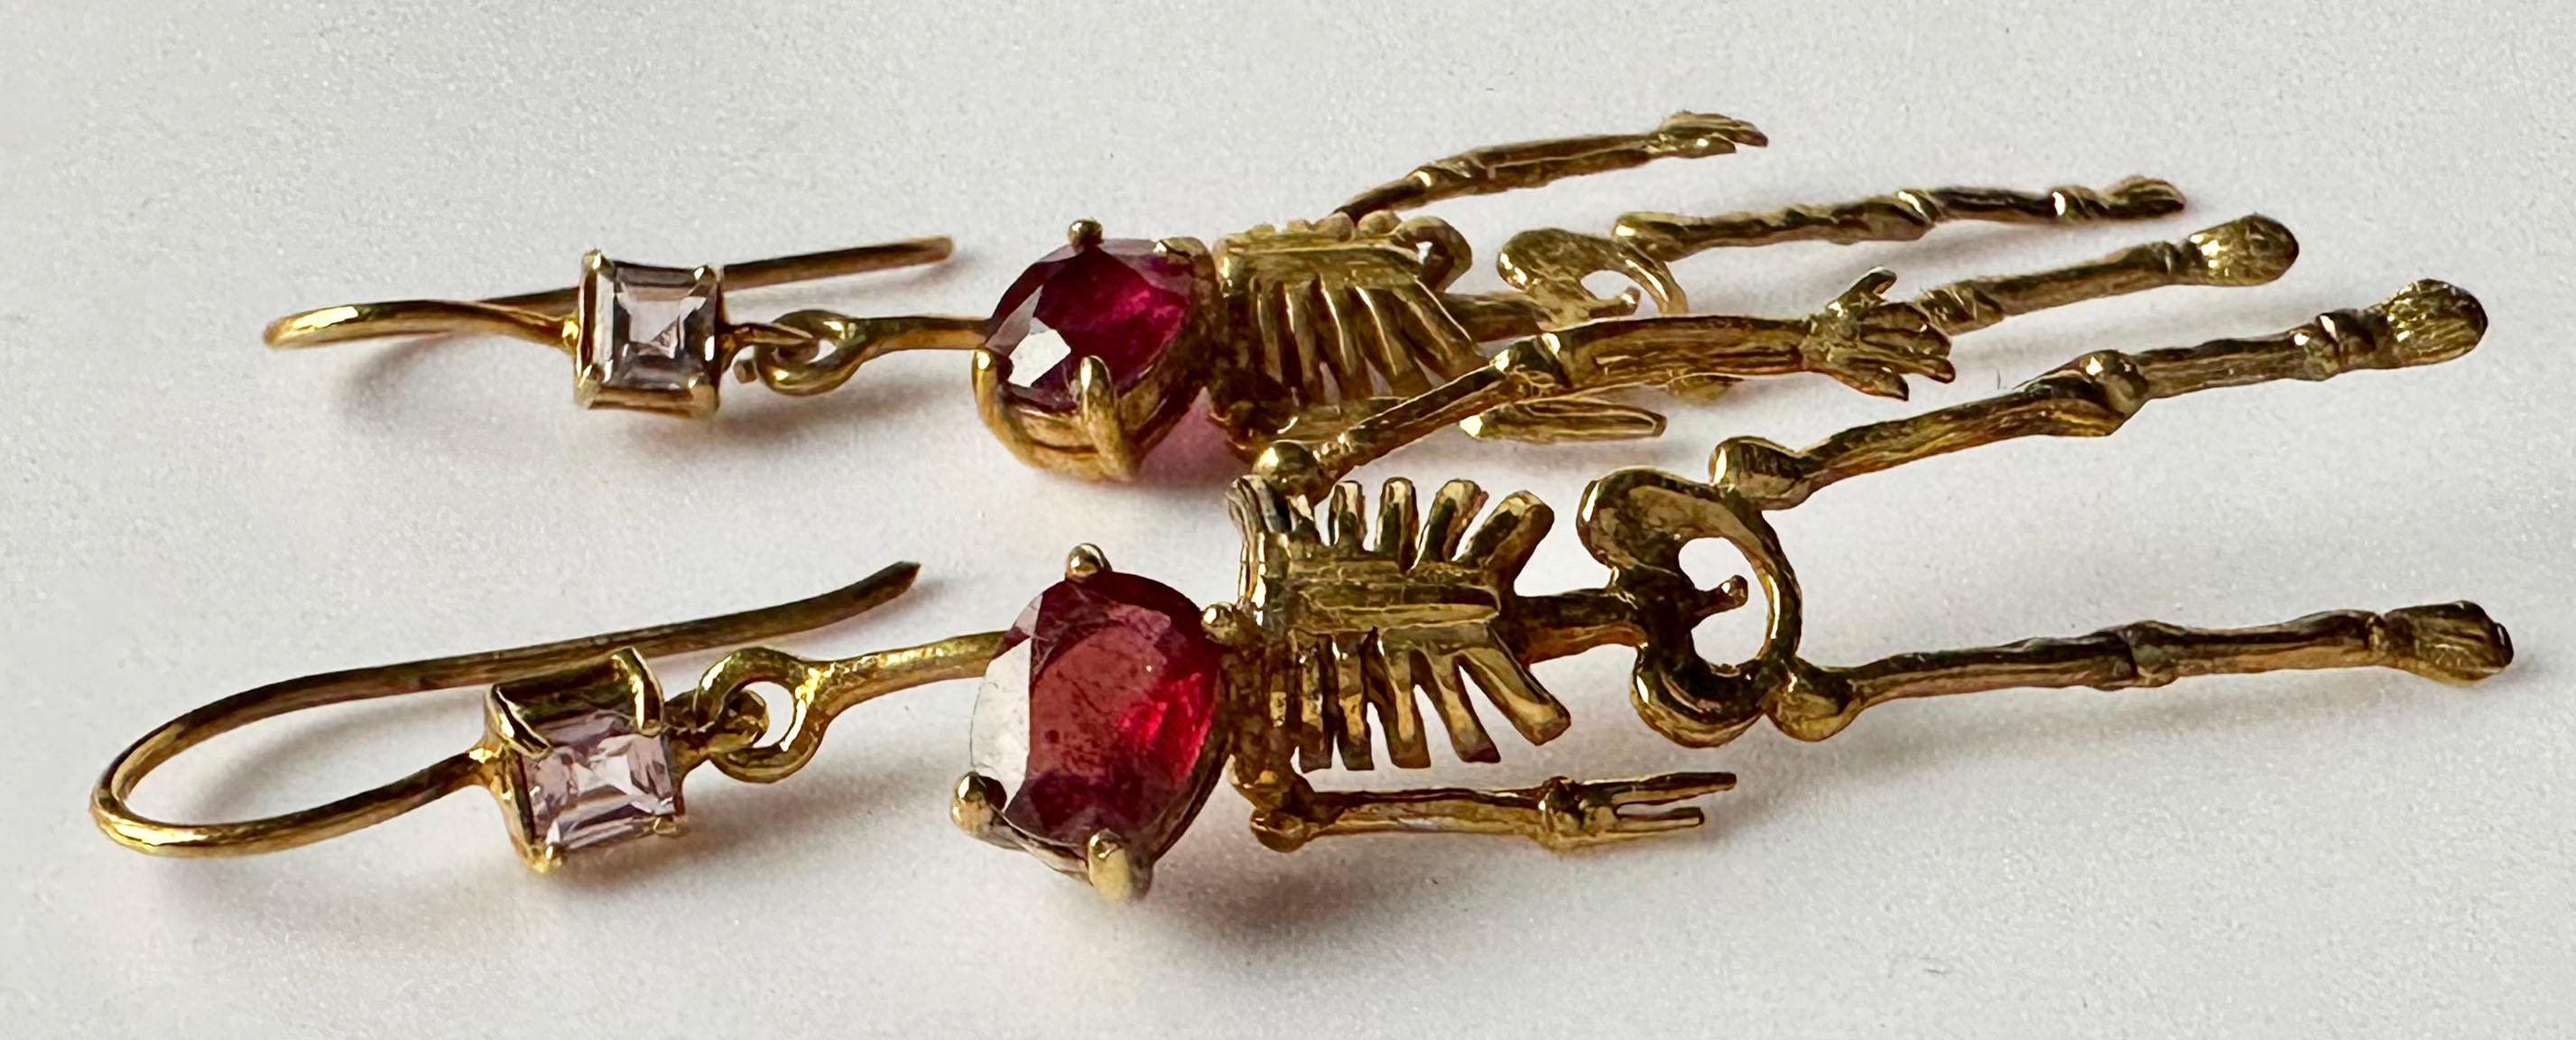 Silver Skeleton Earrings set with Ruby and Tourmaline For Sale 9